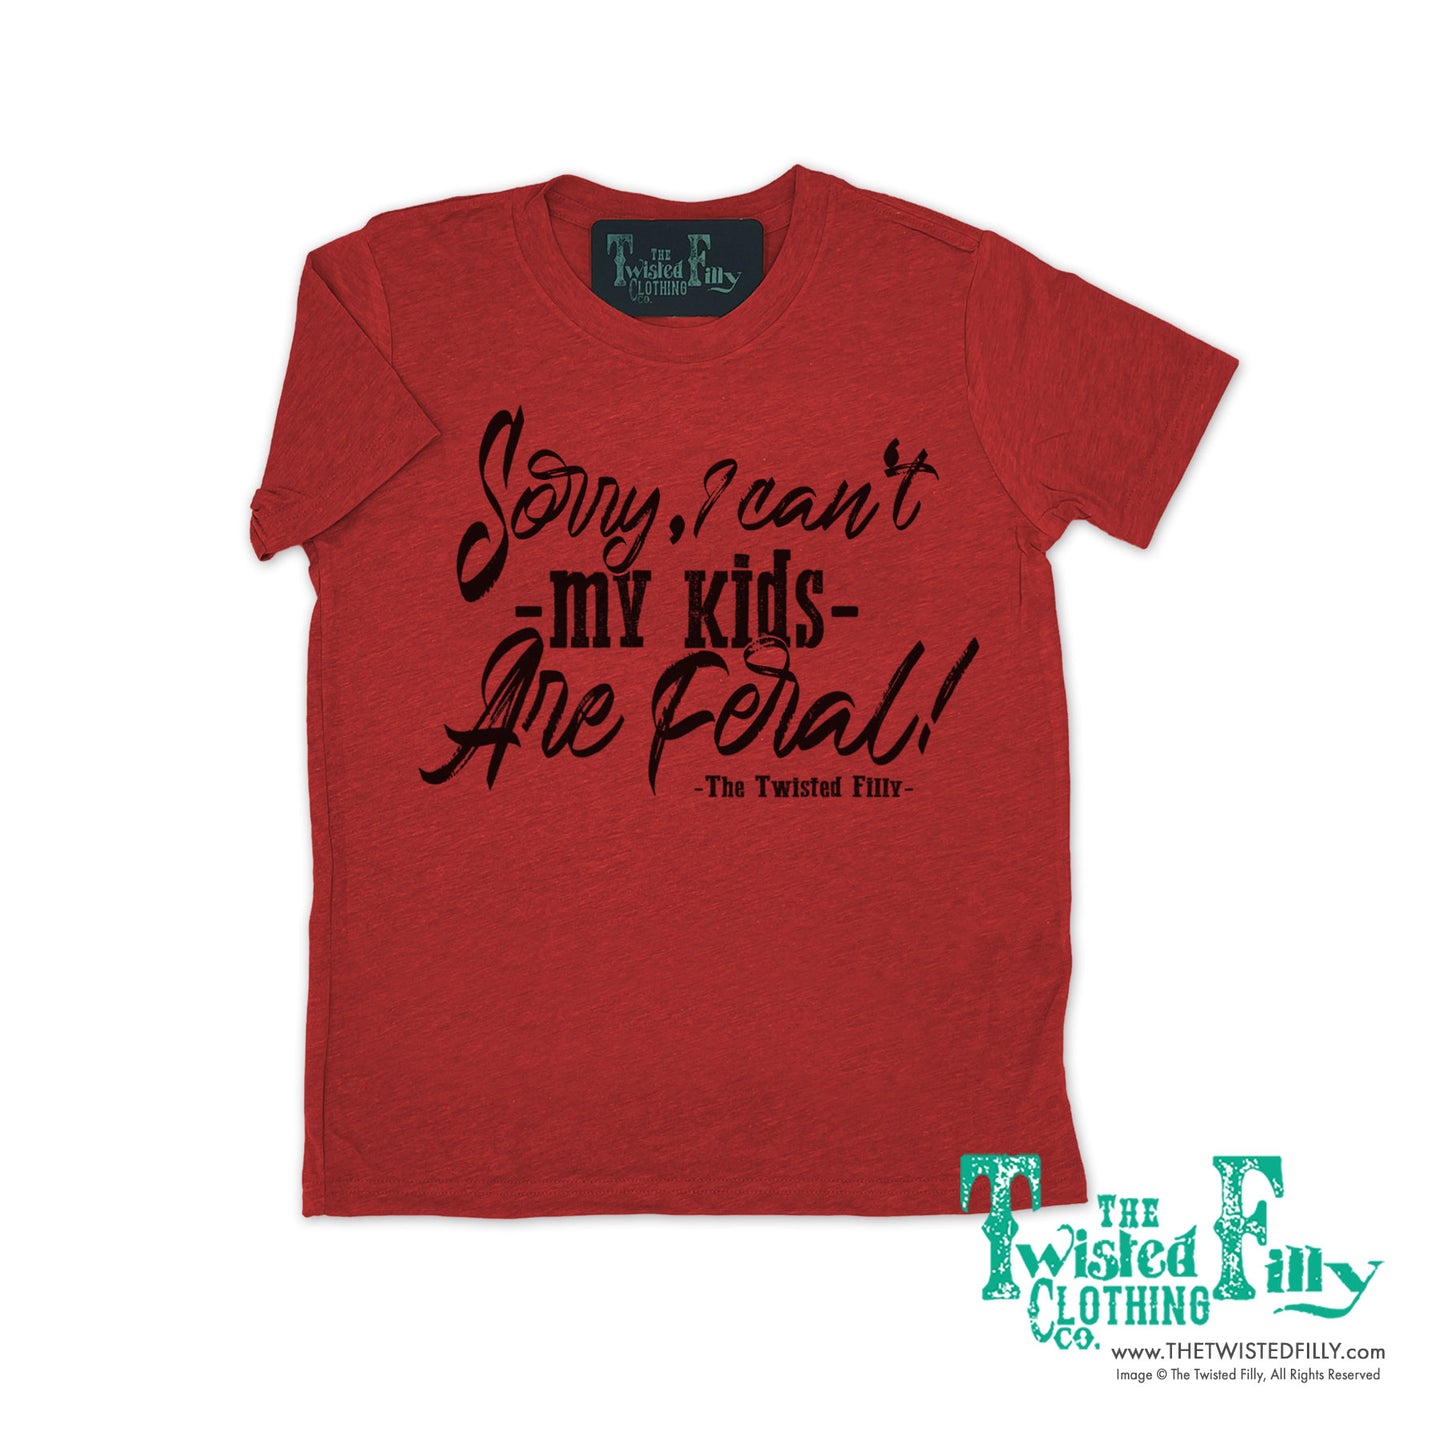 Sorry I Can't My Kids Are Feral - S/S Crew Neck Adult Unisex Tee